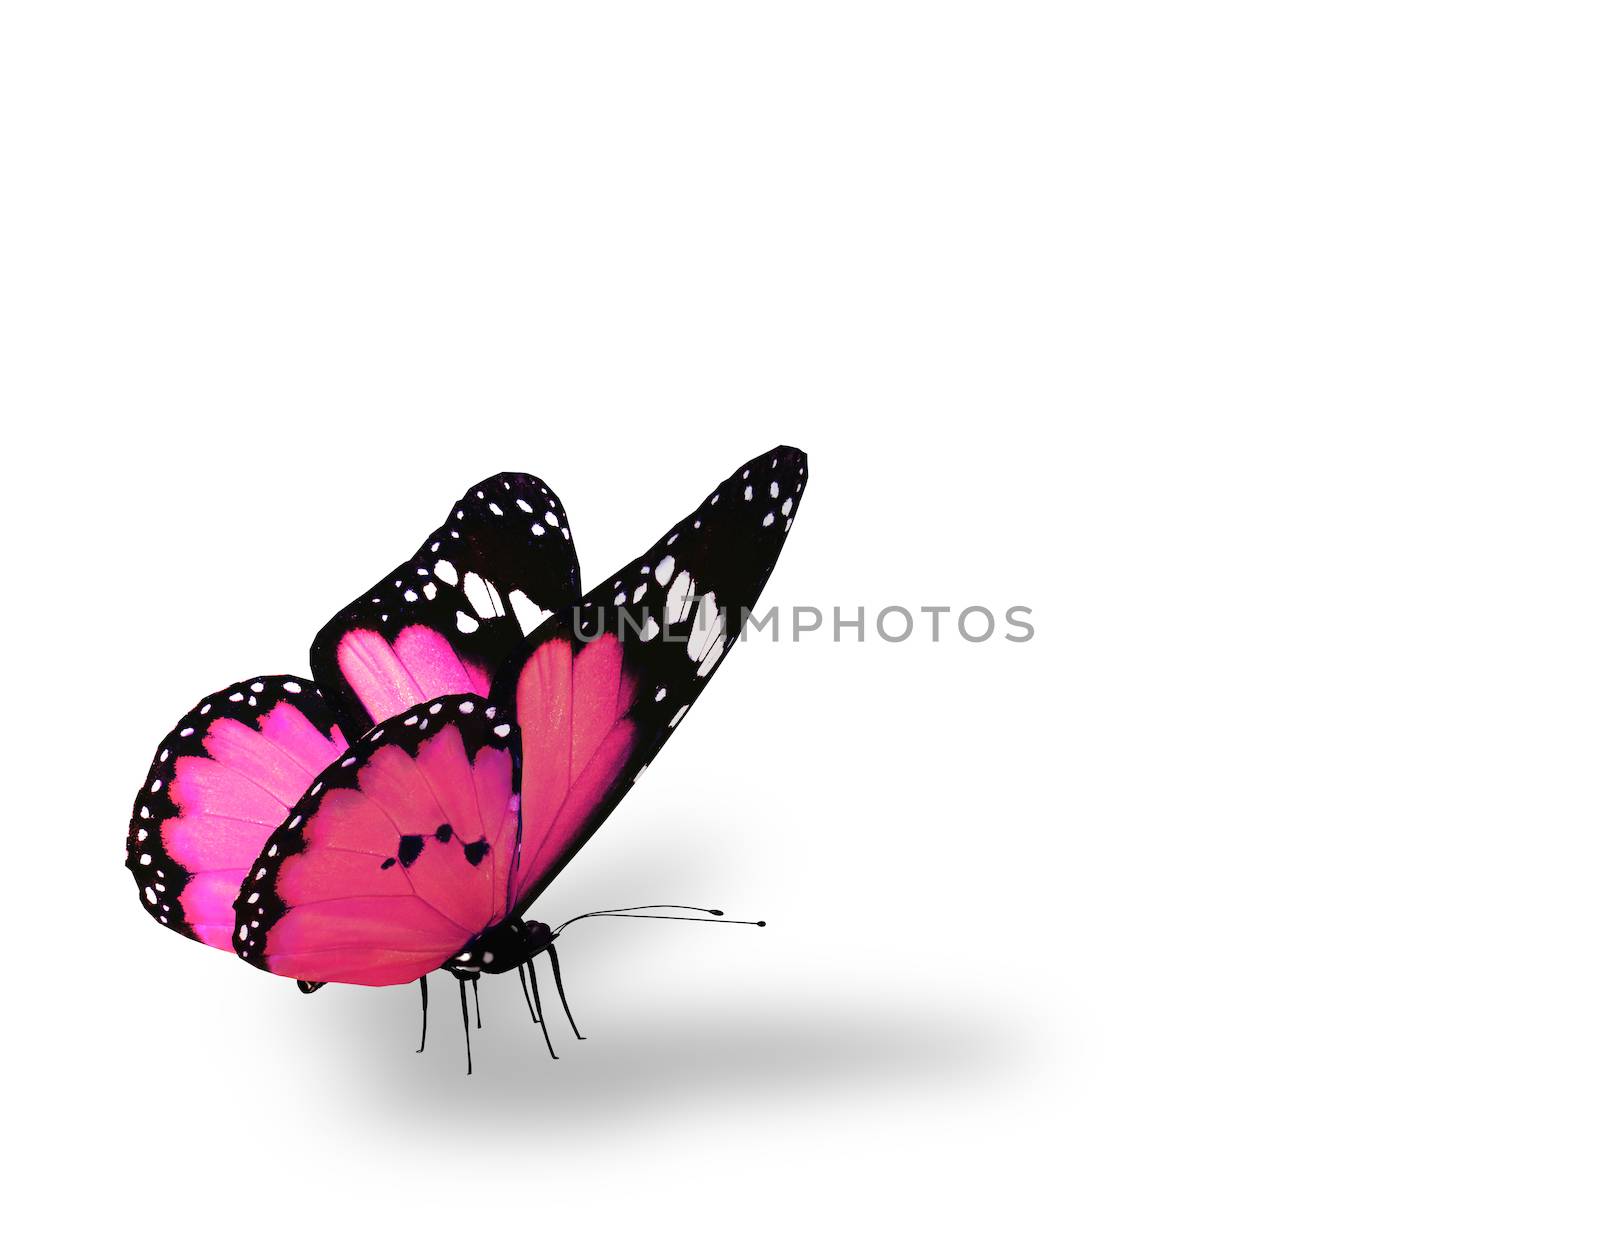 Pink butterfly, isolated on white background